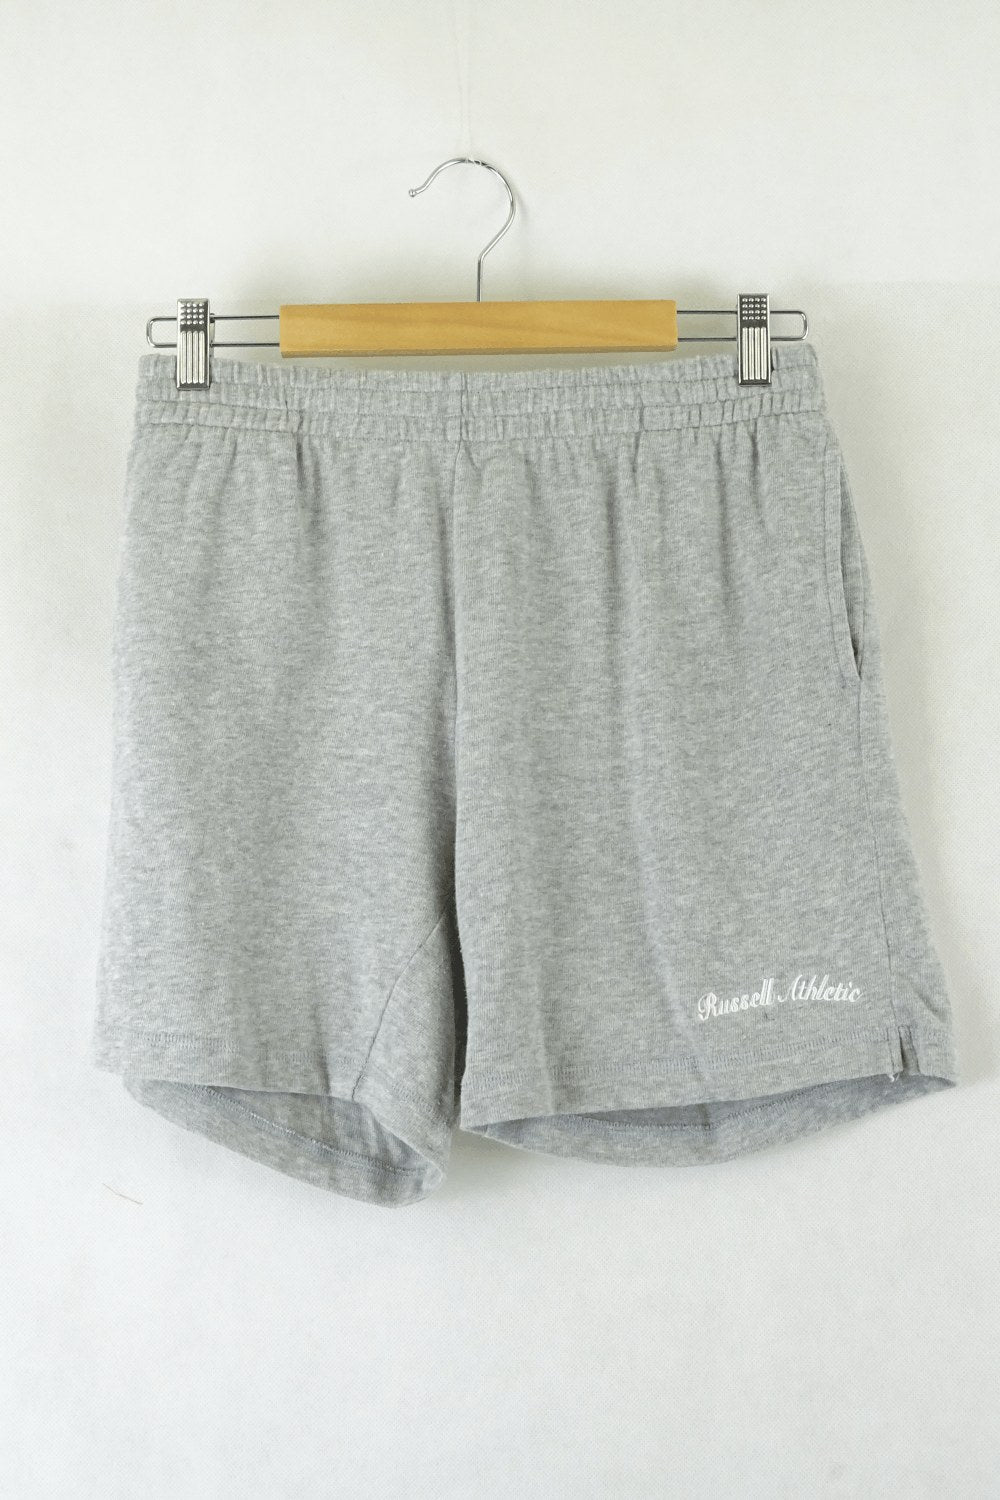 Russell Athletic Grey Marle Shorts 10